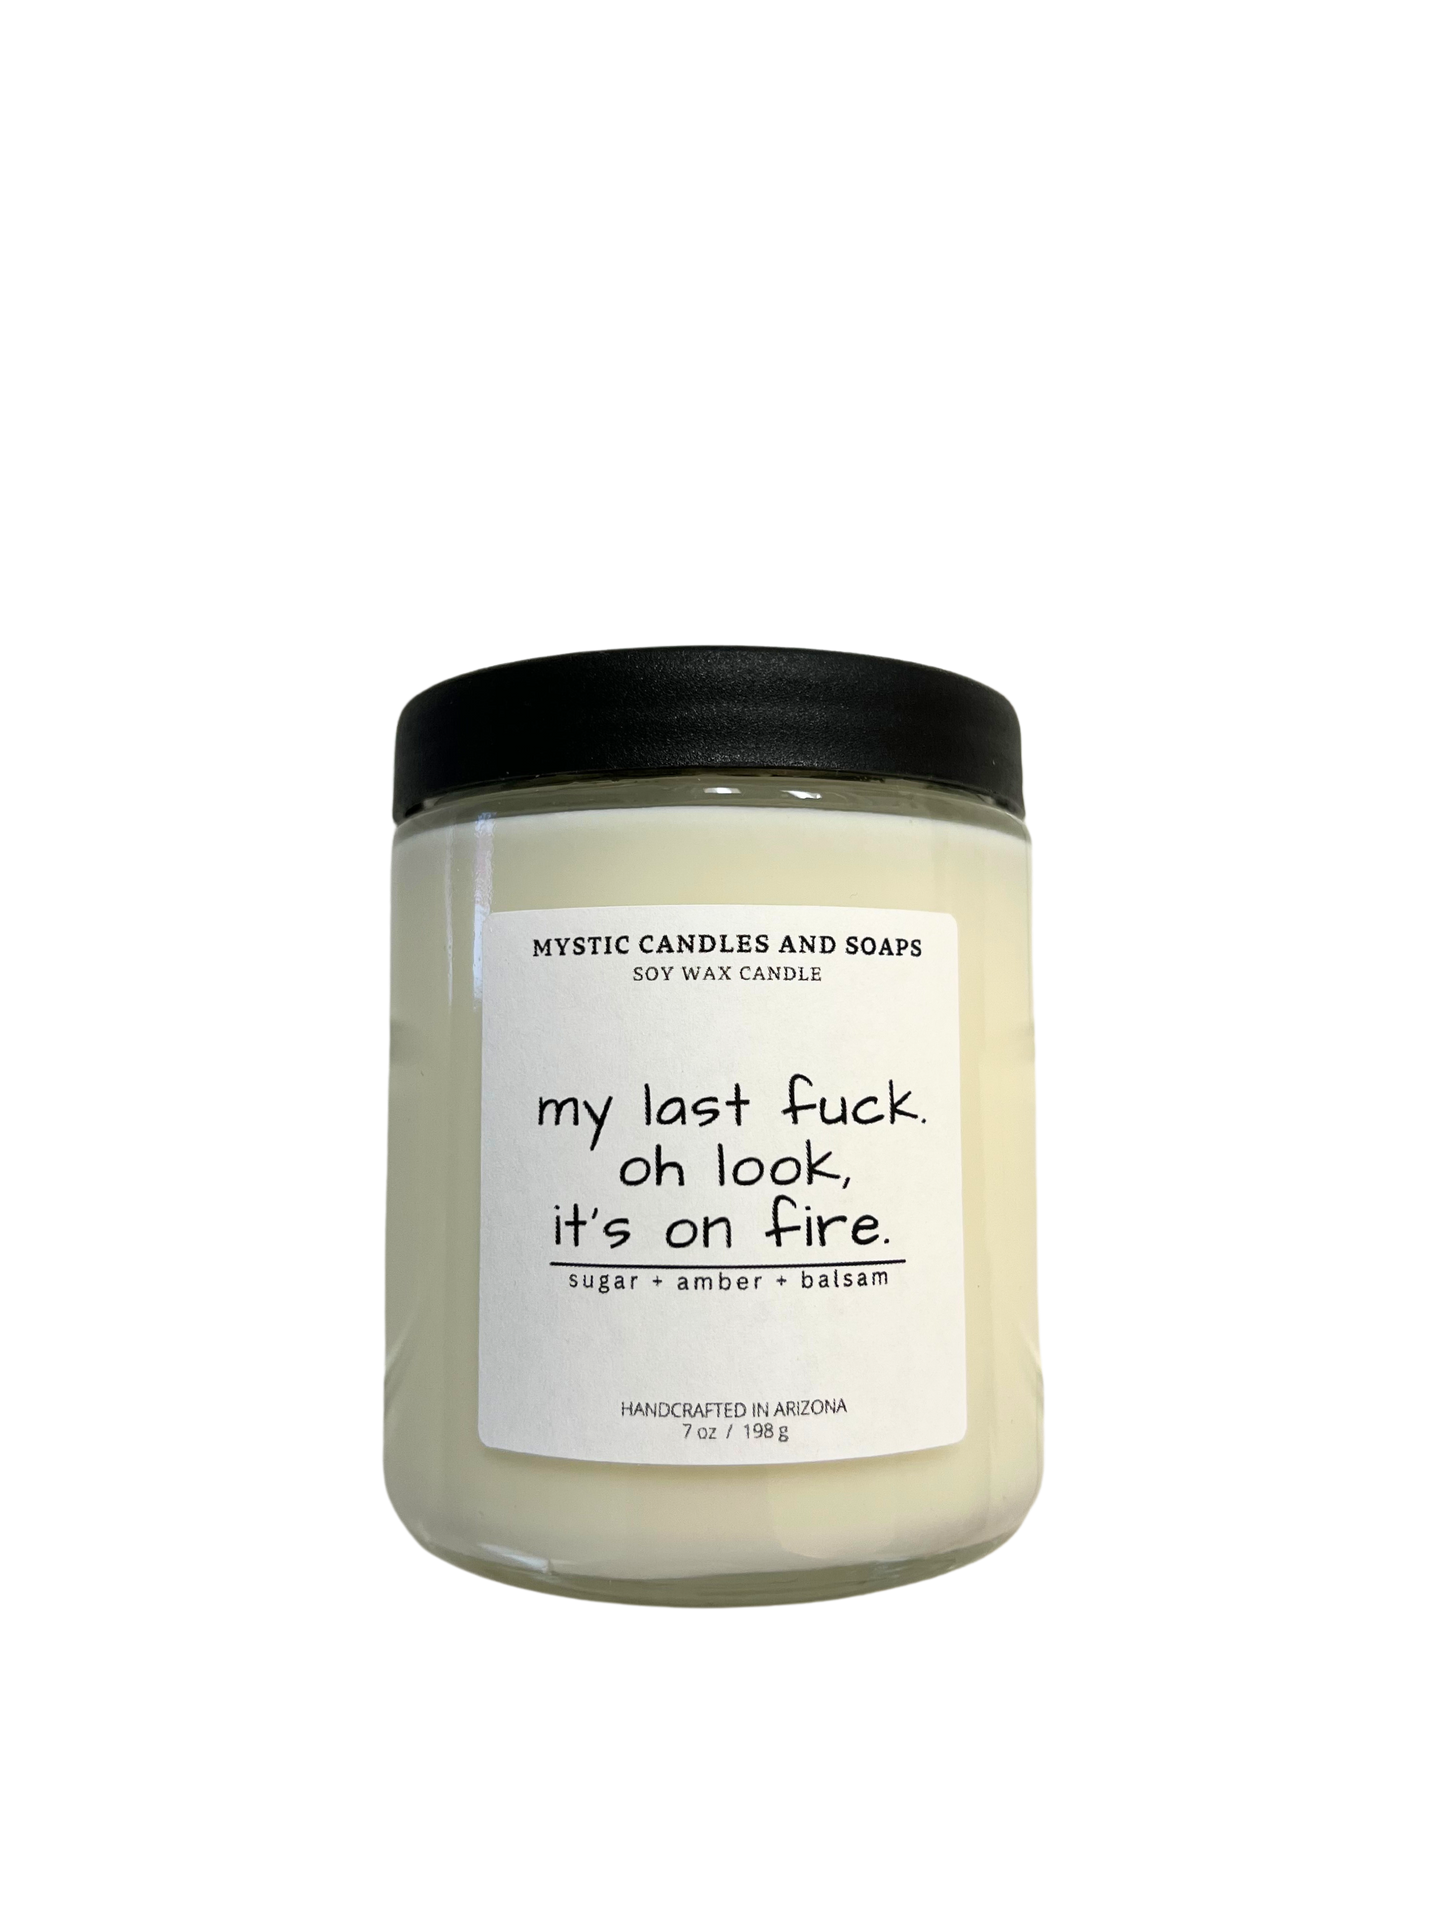 Oh Look My Last F*ck Jar Candle - Mystic Candles